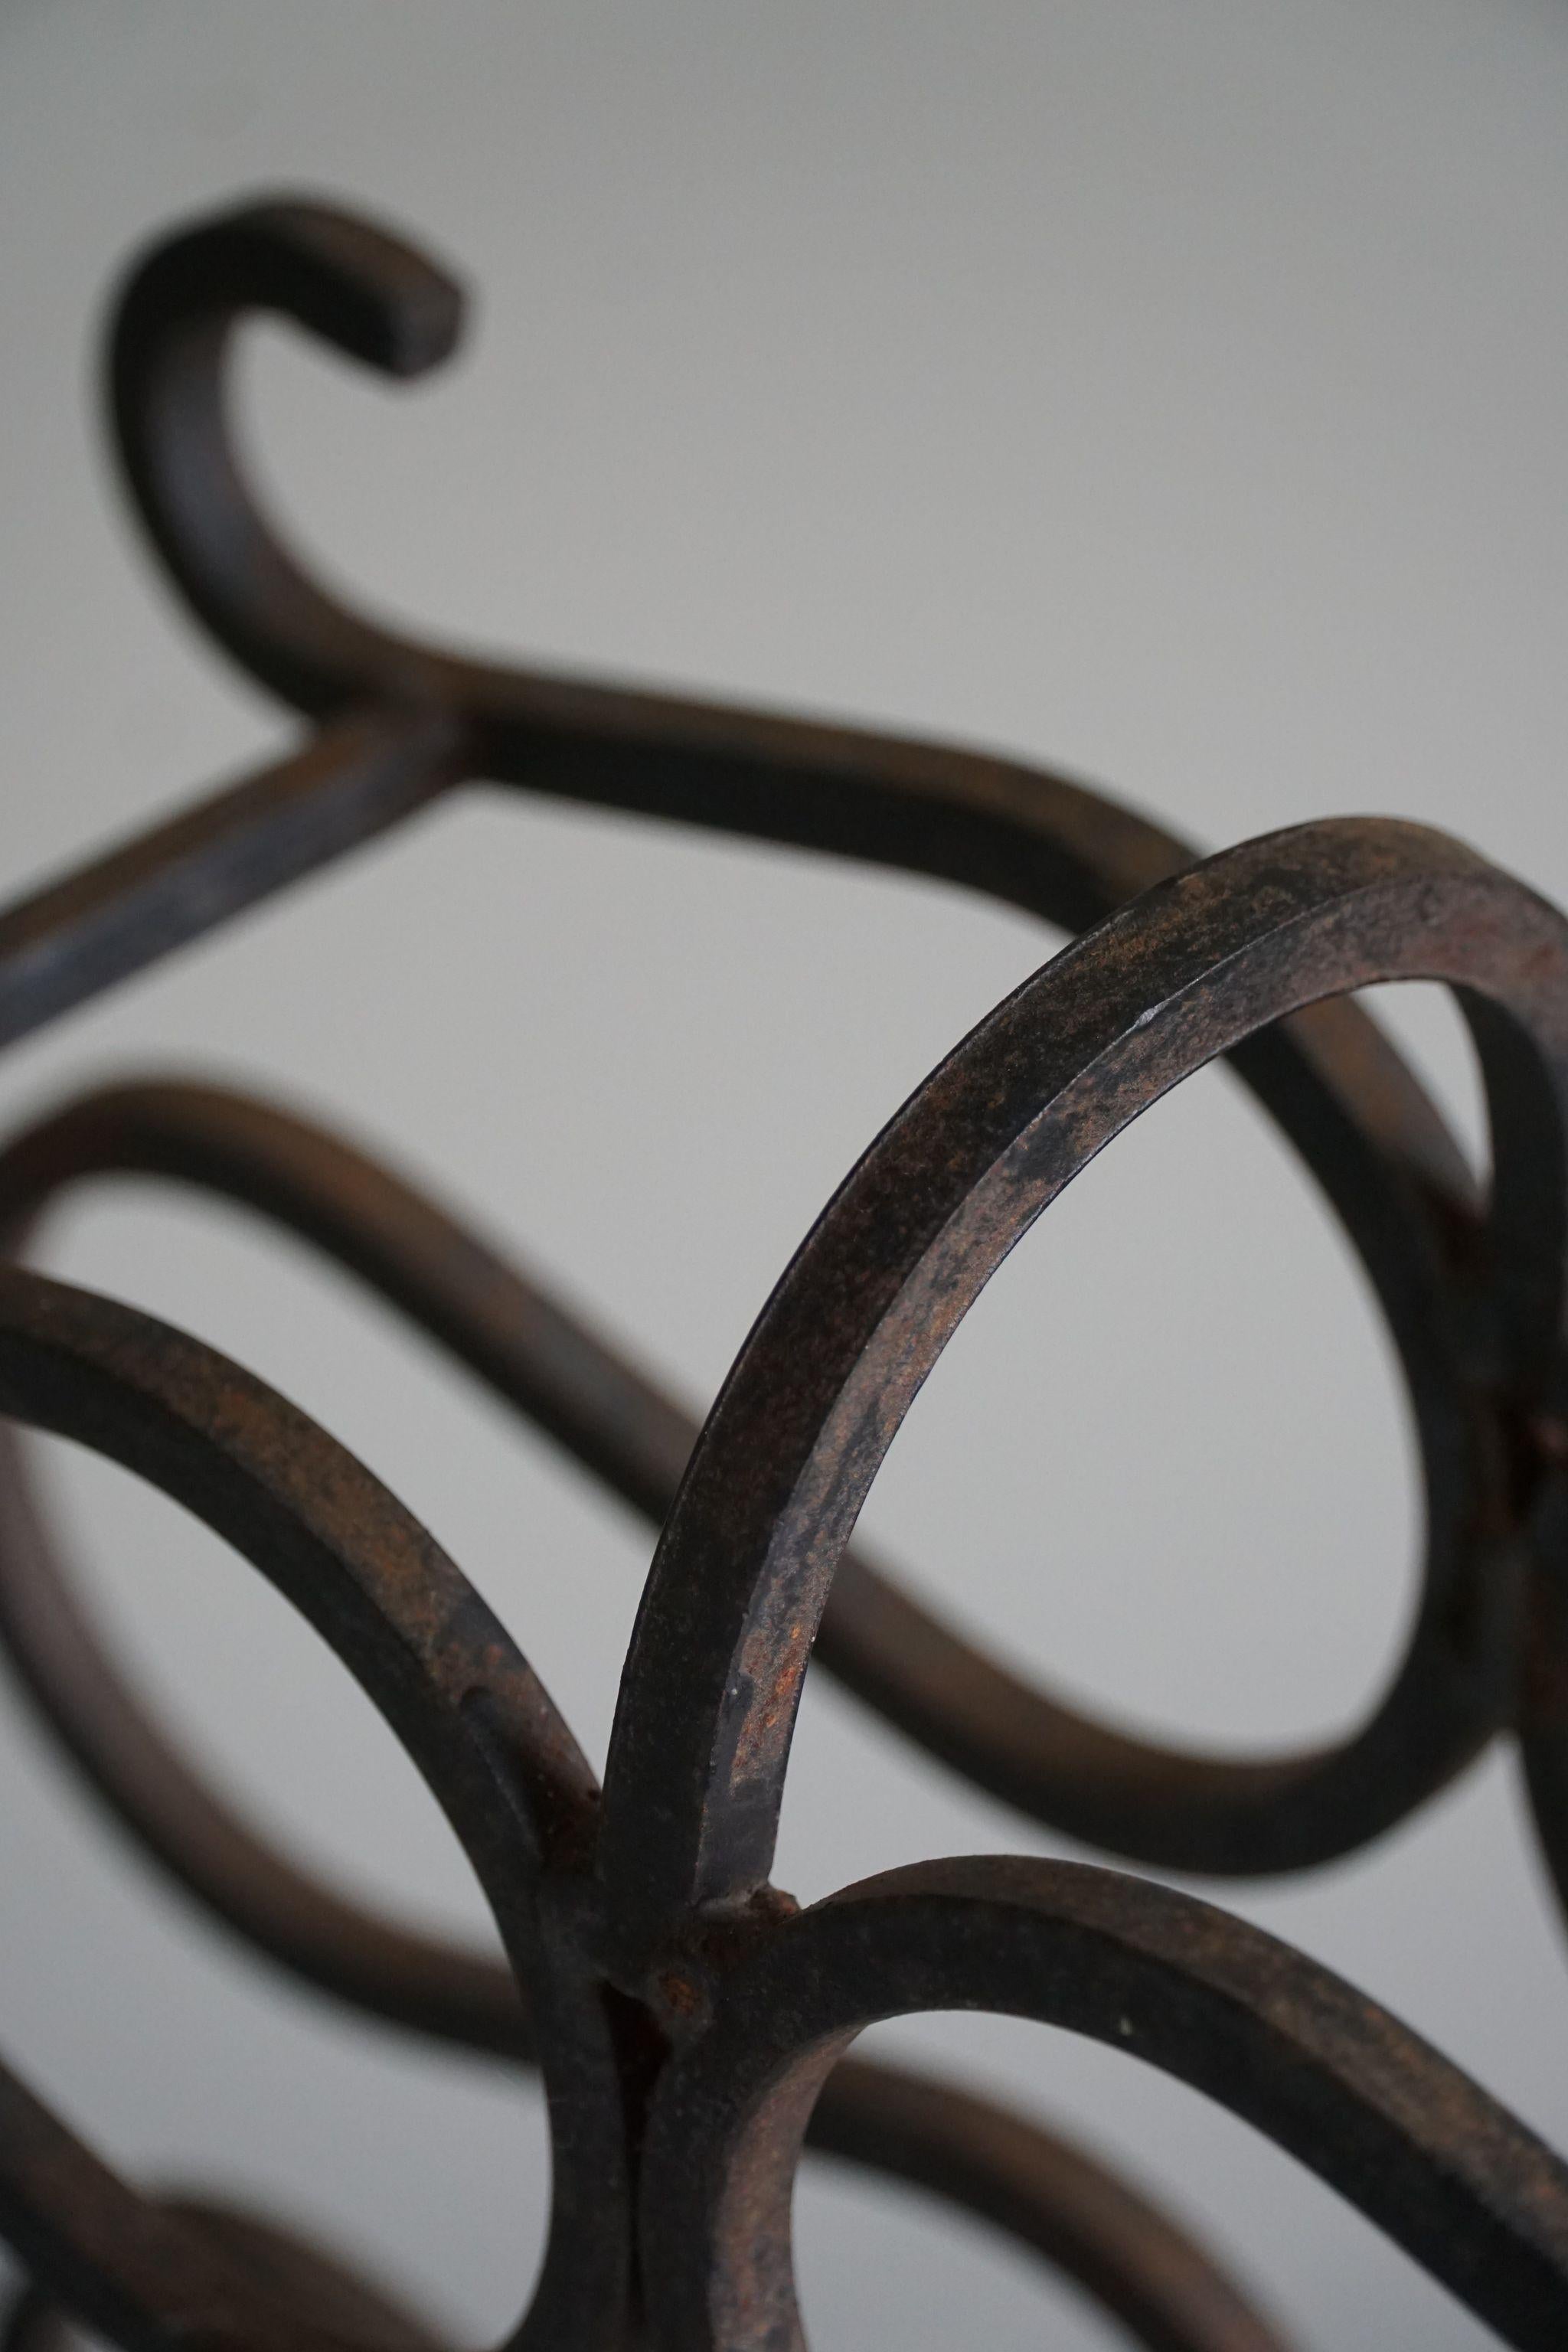 Vintage Sculptural Wine / Magazine Rack in Cast Iron, French Art Deco, 1930s For Sale 1